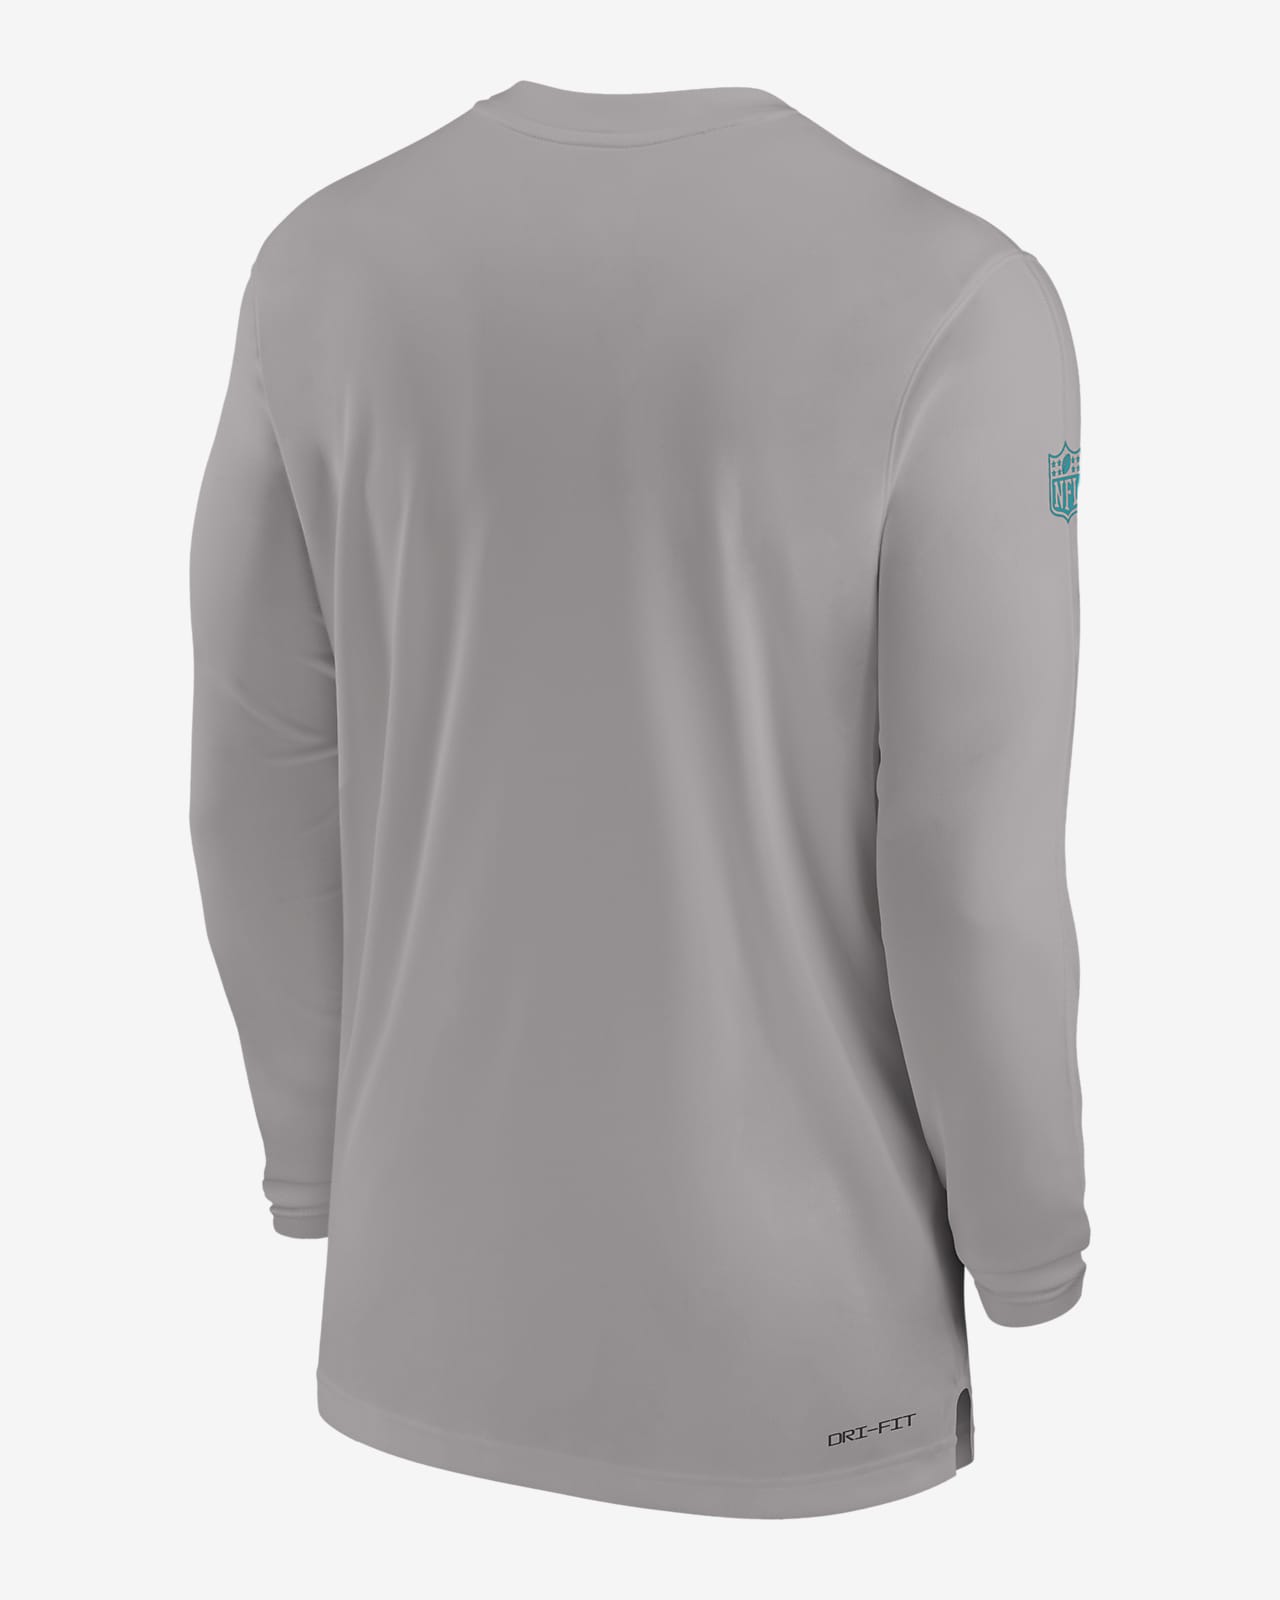 Nike Men's Dri-Fit Sideline Coach (NFL Miami Dolphins) Long-Sleeve Top in Grey, Size: Small | 00M209T9P-0BK